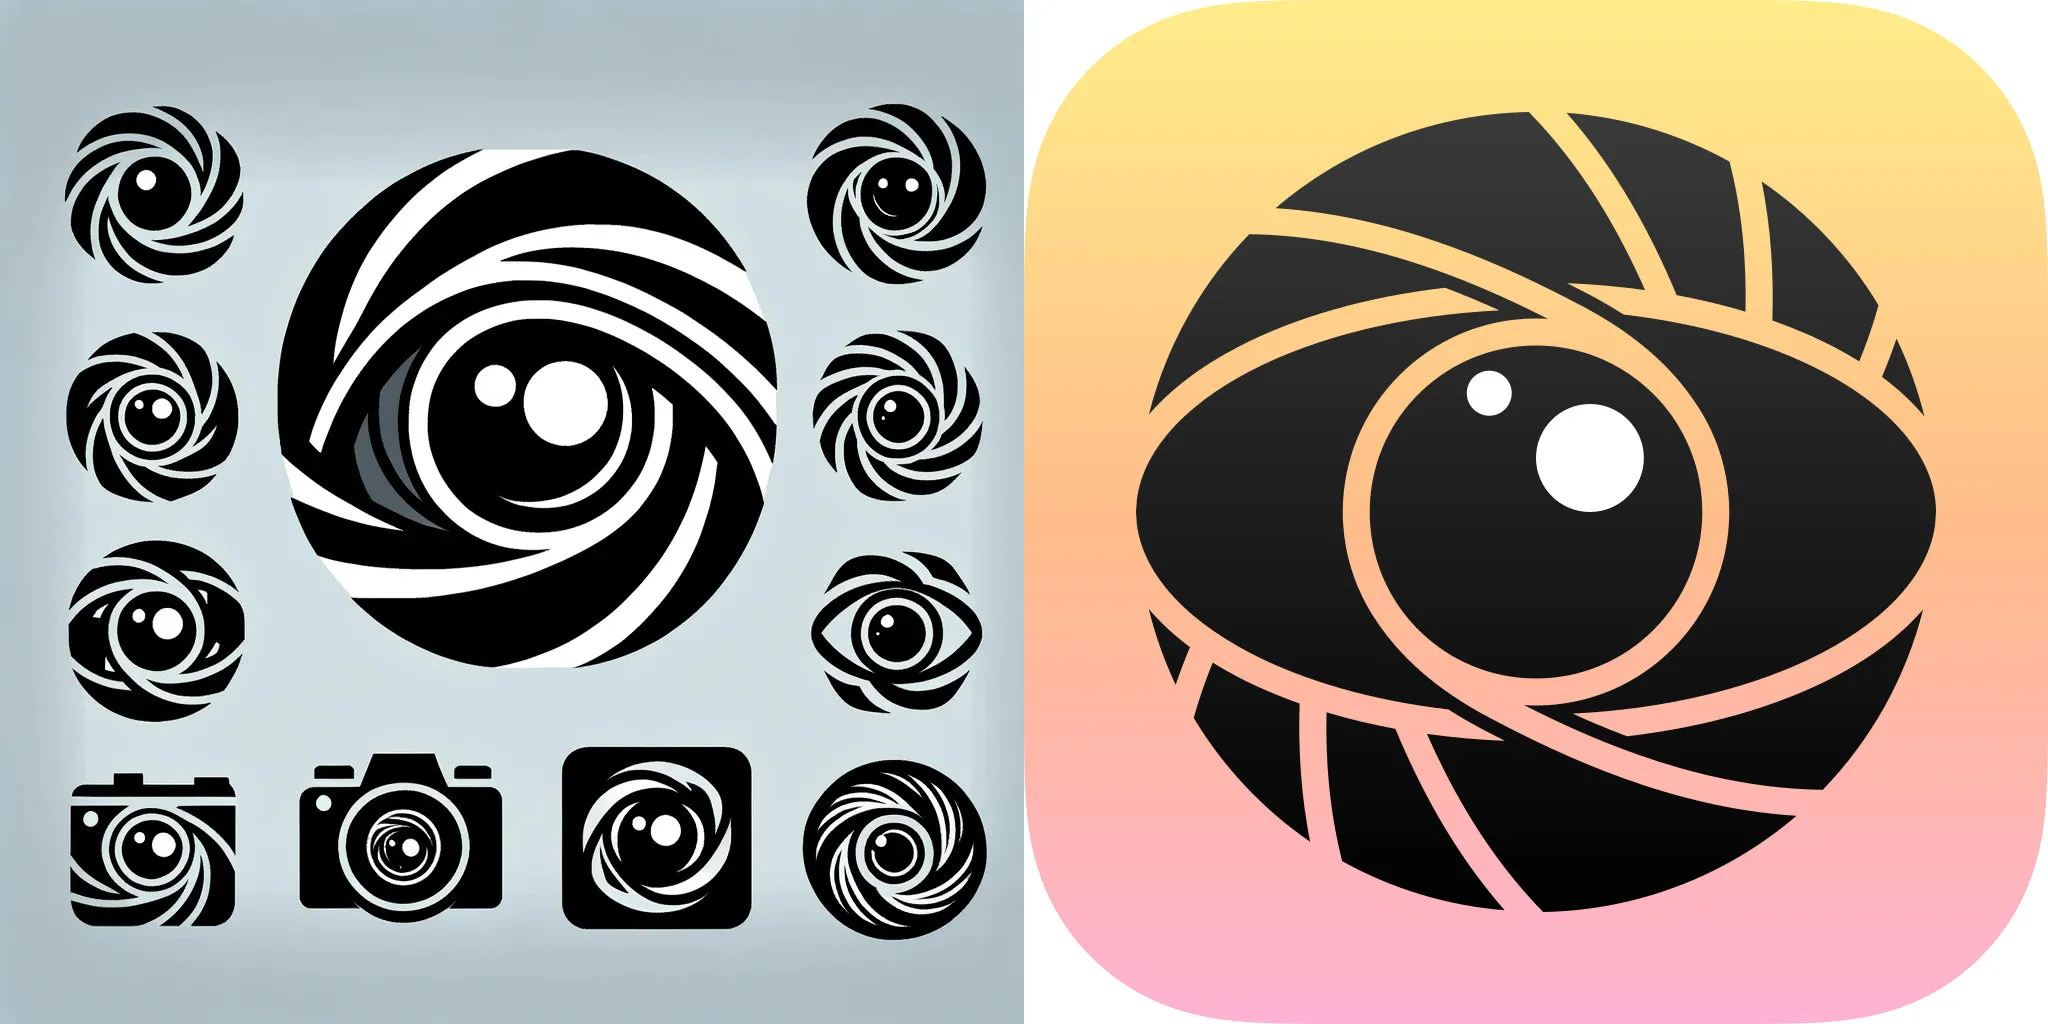 Dalle-3 output on left, showing several icons following the motif of an eye and
a camera iris and a muted blue background. On the right is the final icon,
featuring an eye surrounded by iris blades, with two of the blades acting as
the outline for the eye's pupil. The icon is drawn on top of a pink, orange and
yellow gradient background.
